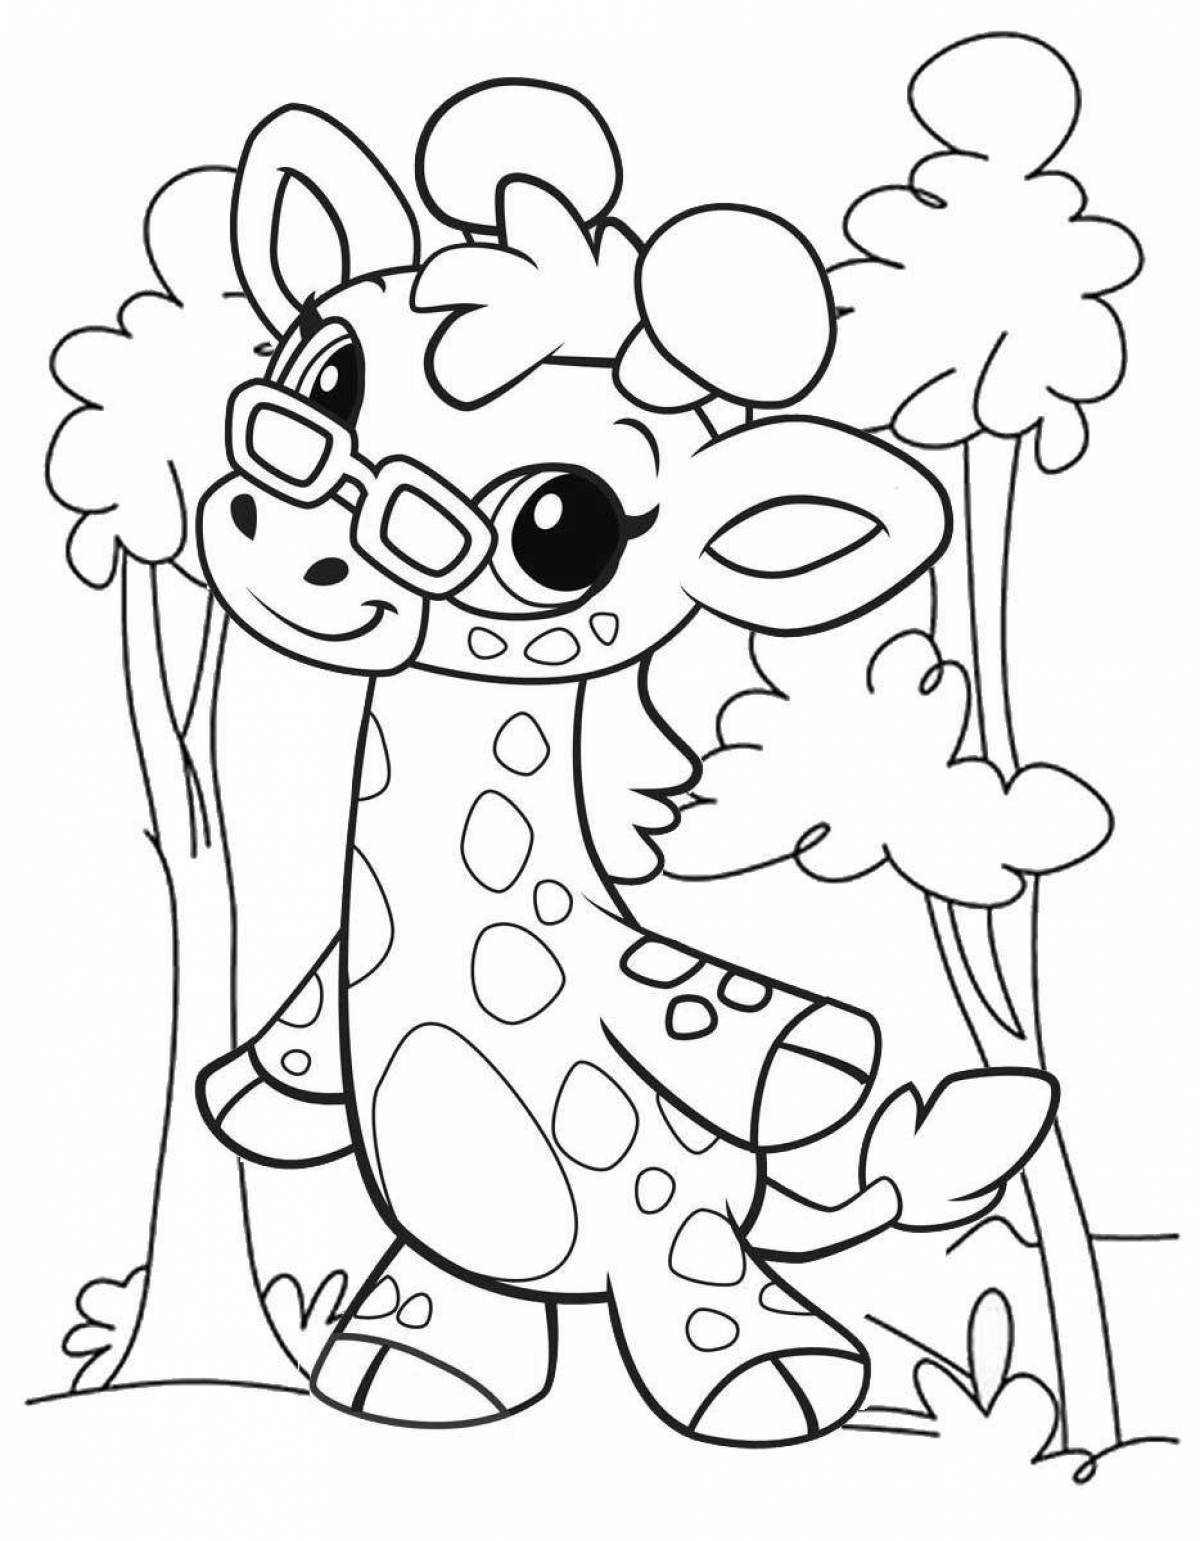 Gorgeous giraffe coloring page